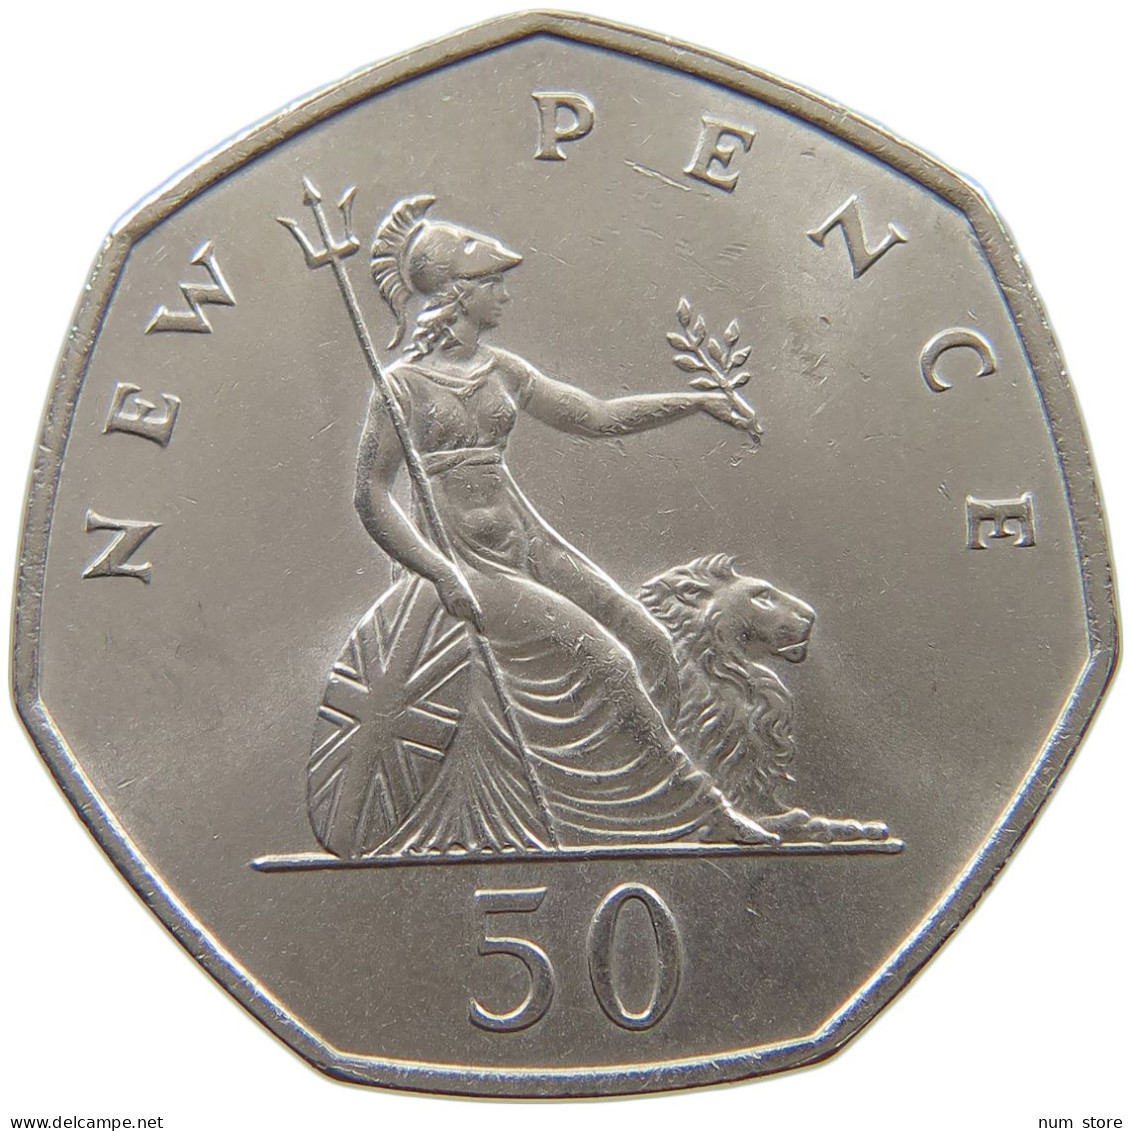 GREAT BRITAIN 50 PENCE 1969 #a069 0543 - 50 Pence